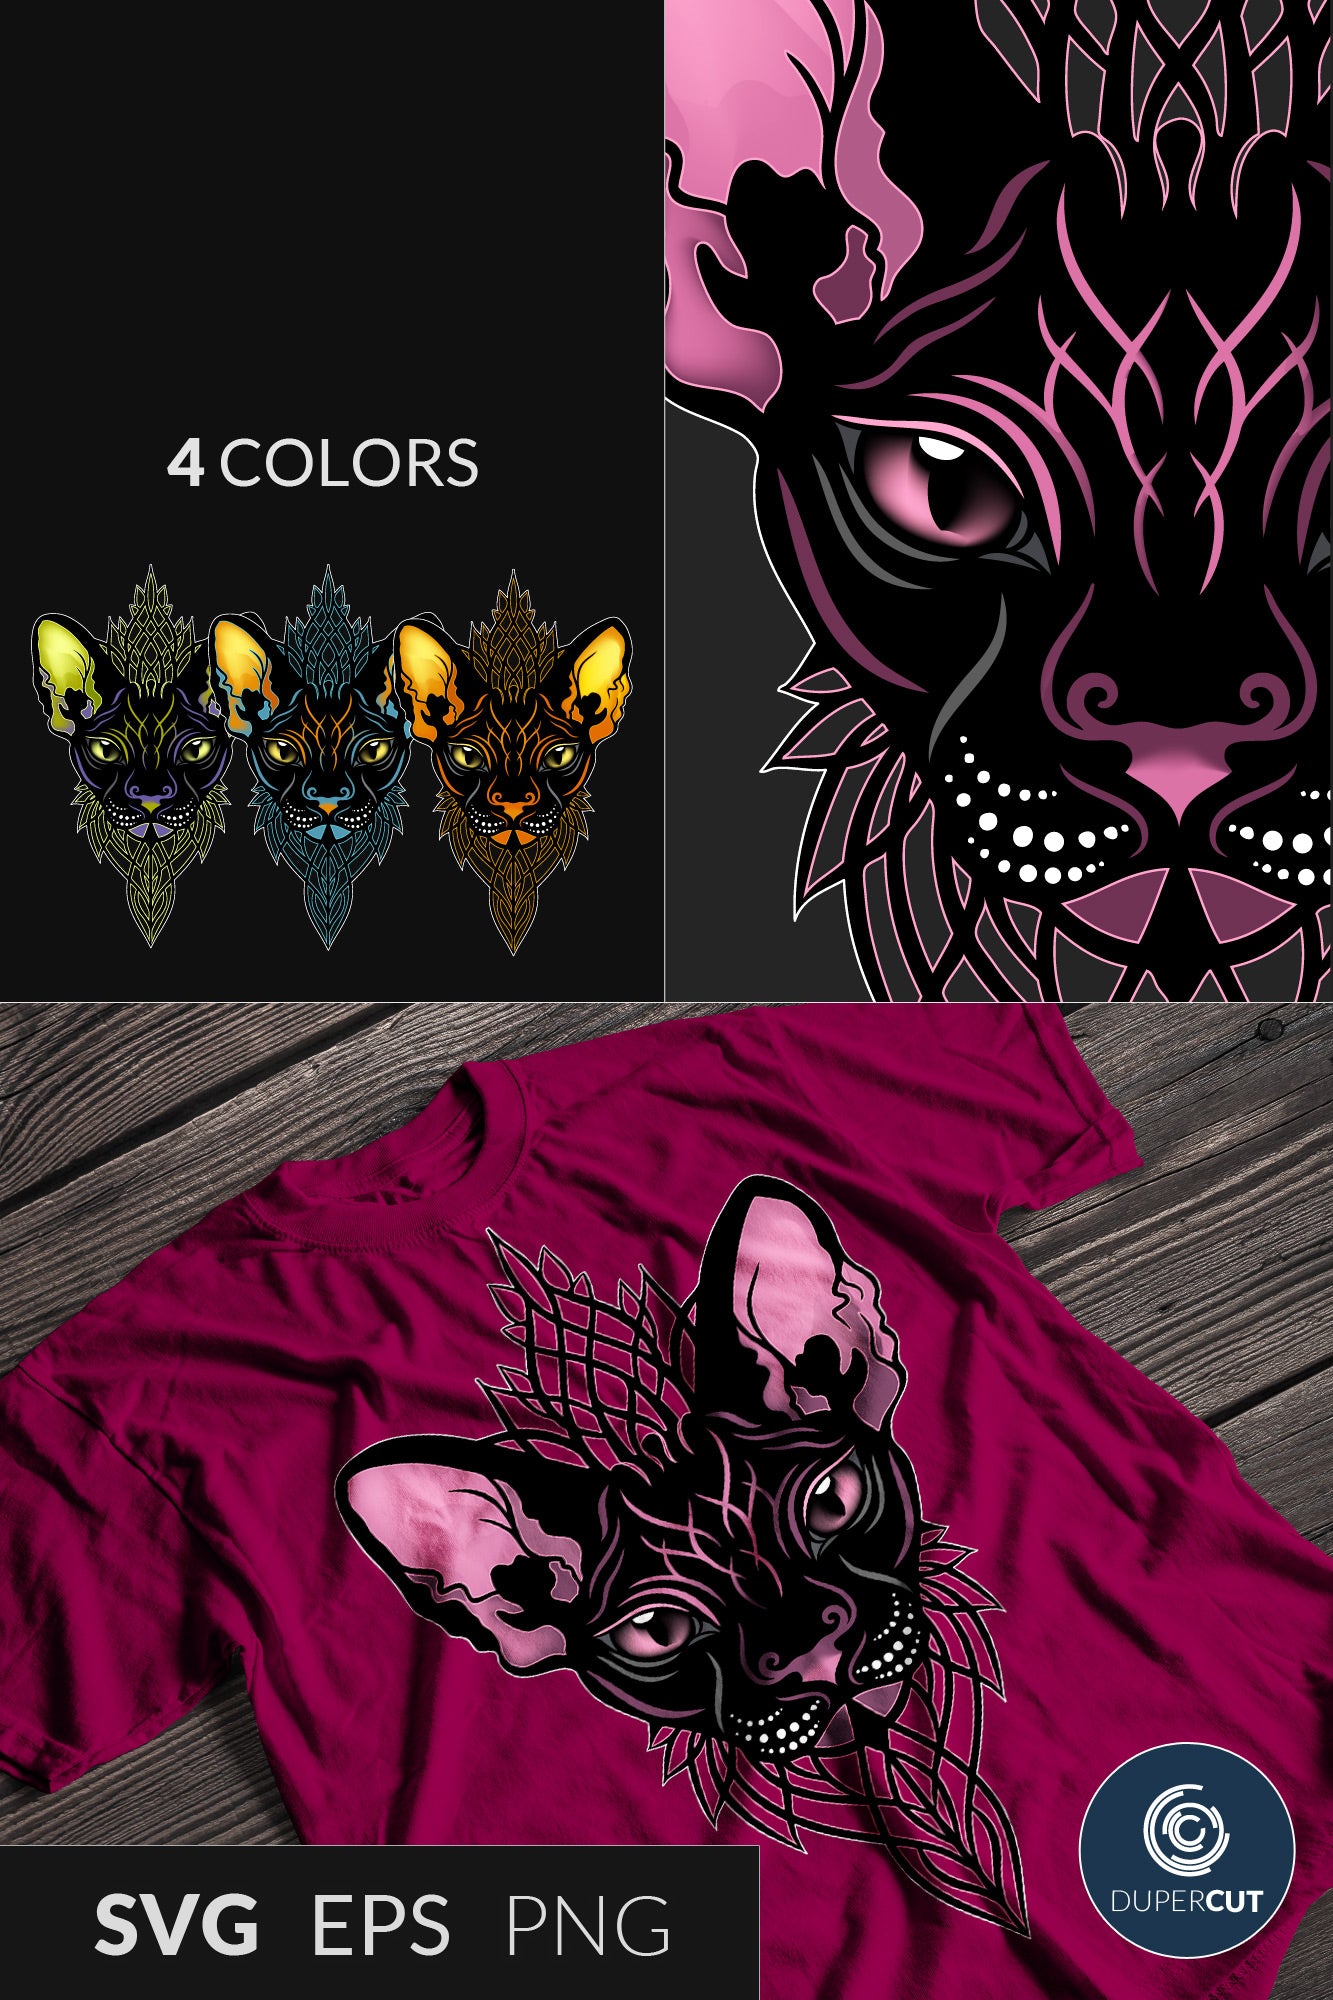 SphynxCat-pink1.jpg  2000 × 2000px  Sphynx Cat - Amazon Merch template, custom apparel design, commercial license - EPS, SVG, PNG files. Vector Colour illustration for print on demand, sublimation, custom t-shirts, hoodies, tumblers.